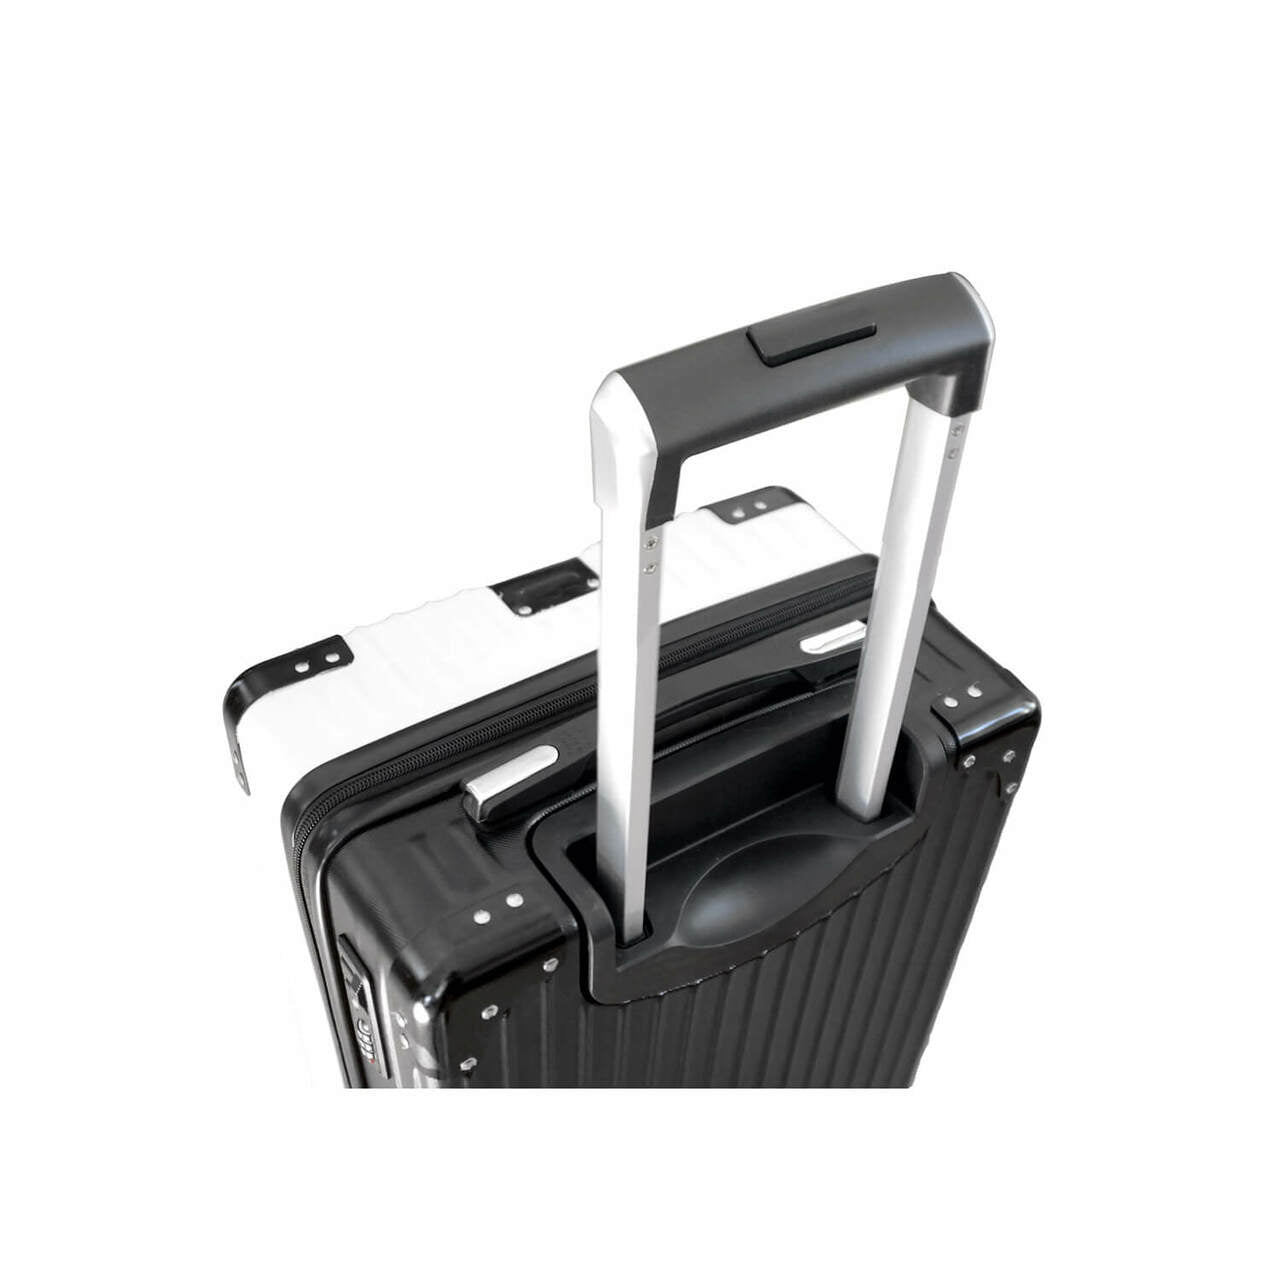 Dallas Cowboys Carry-On Hardcase Spinner Luggage